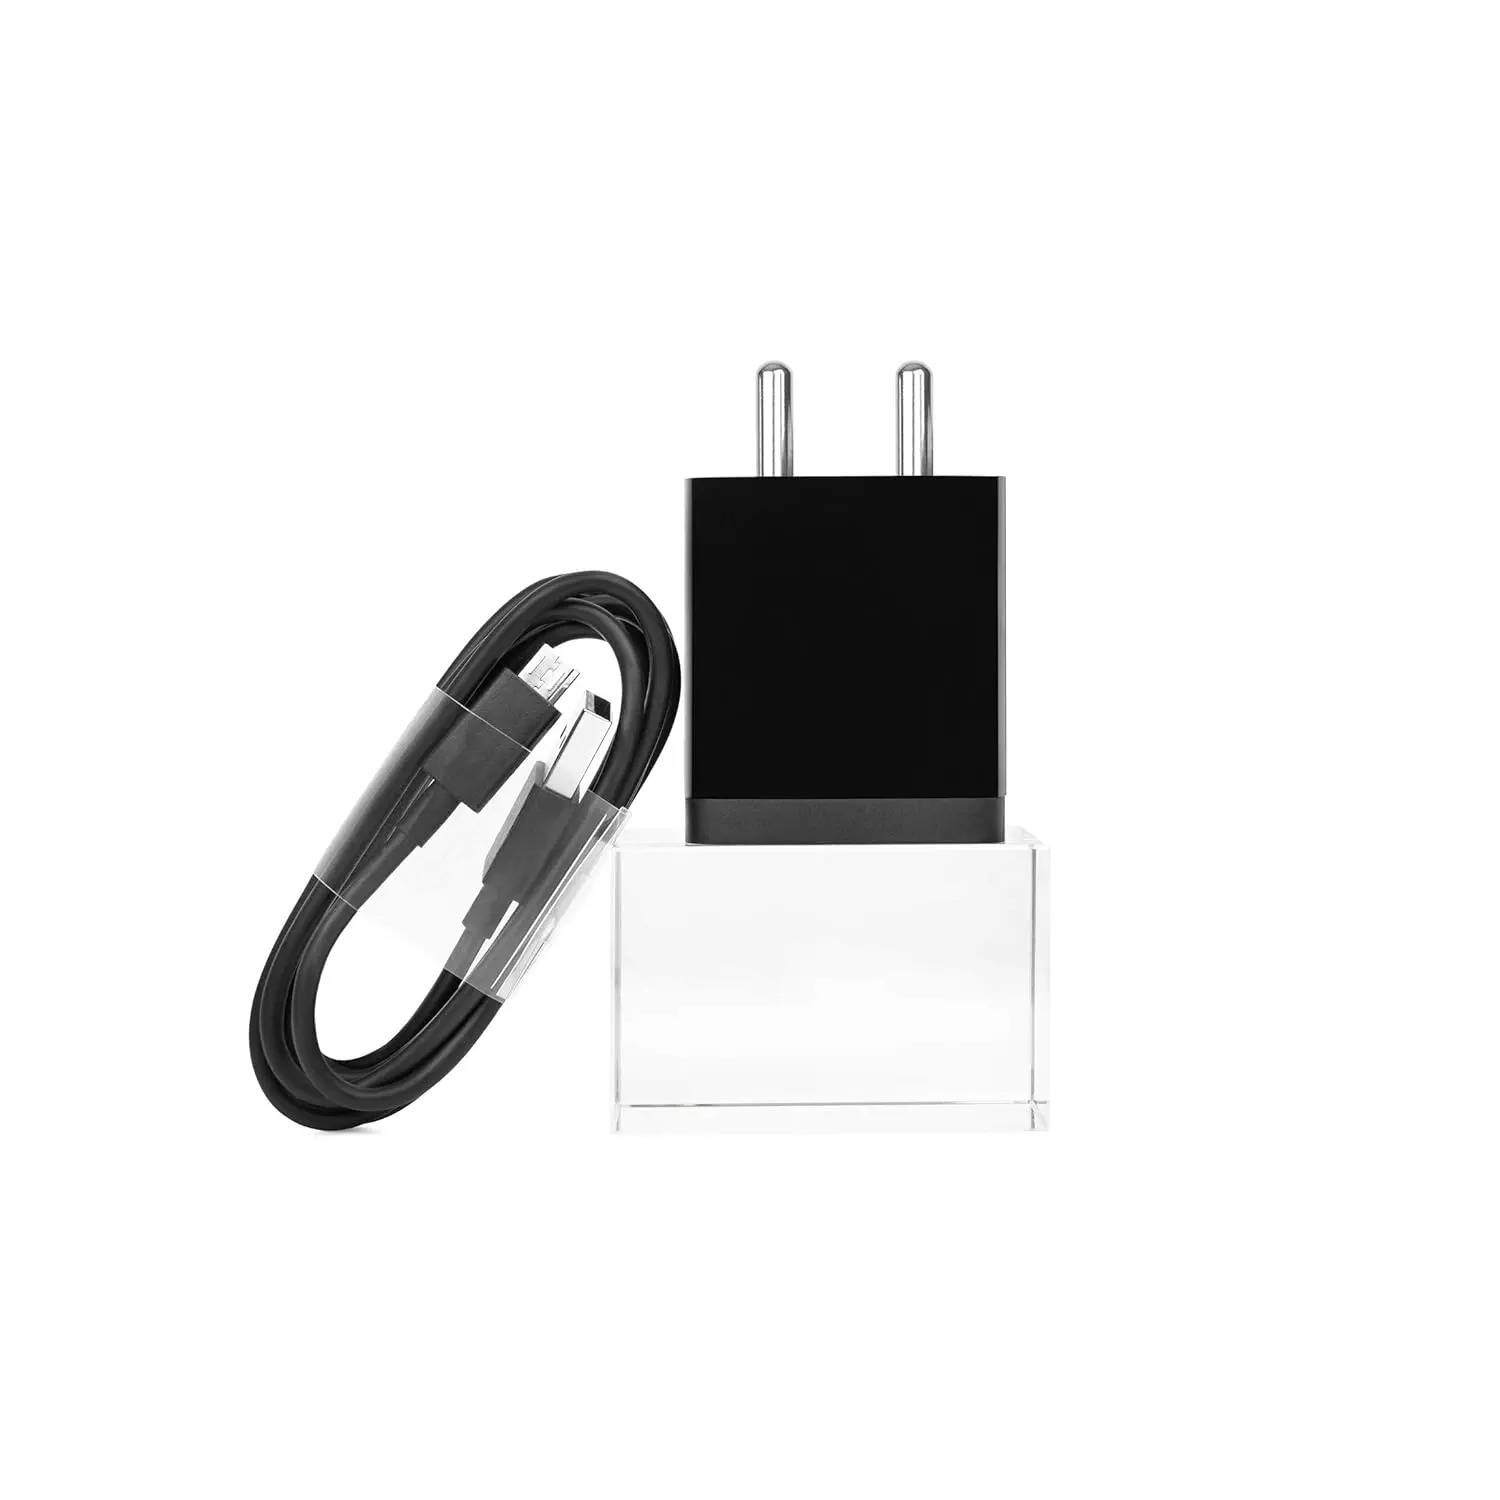 Oraimo 22.5W USB&C Wall 2 Port Charger - Support all Android fast char –  oraimo mobile limited